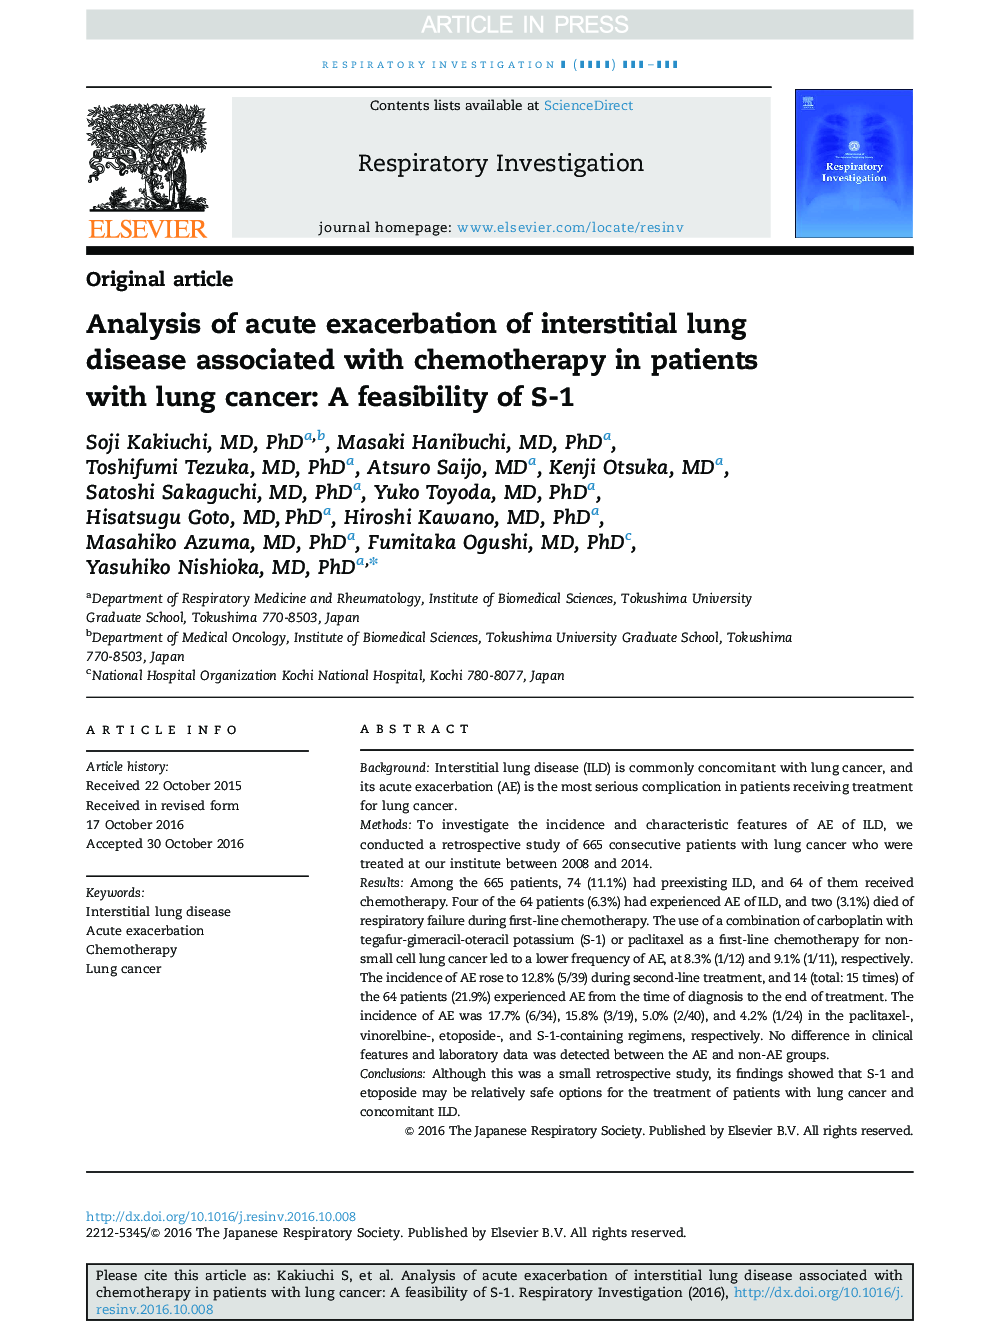 Analysis of acute exacerbation of interstitial lung disease associated with chemotherapy in patients with lung cancer: A feasibility of S-1